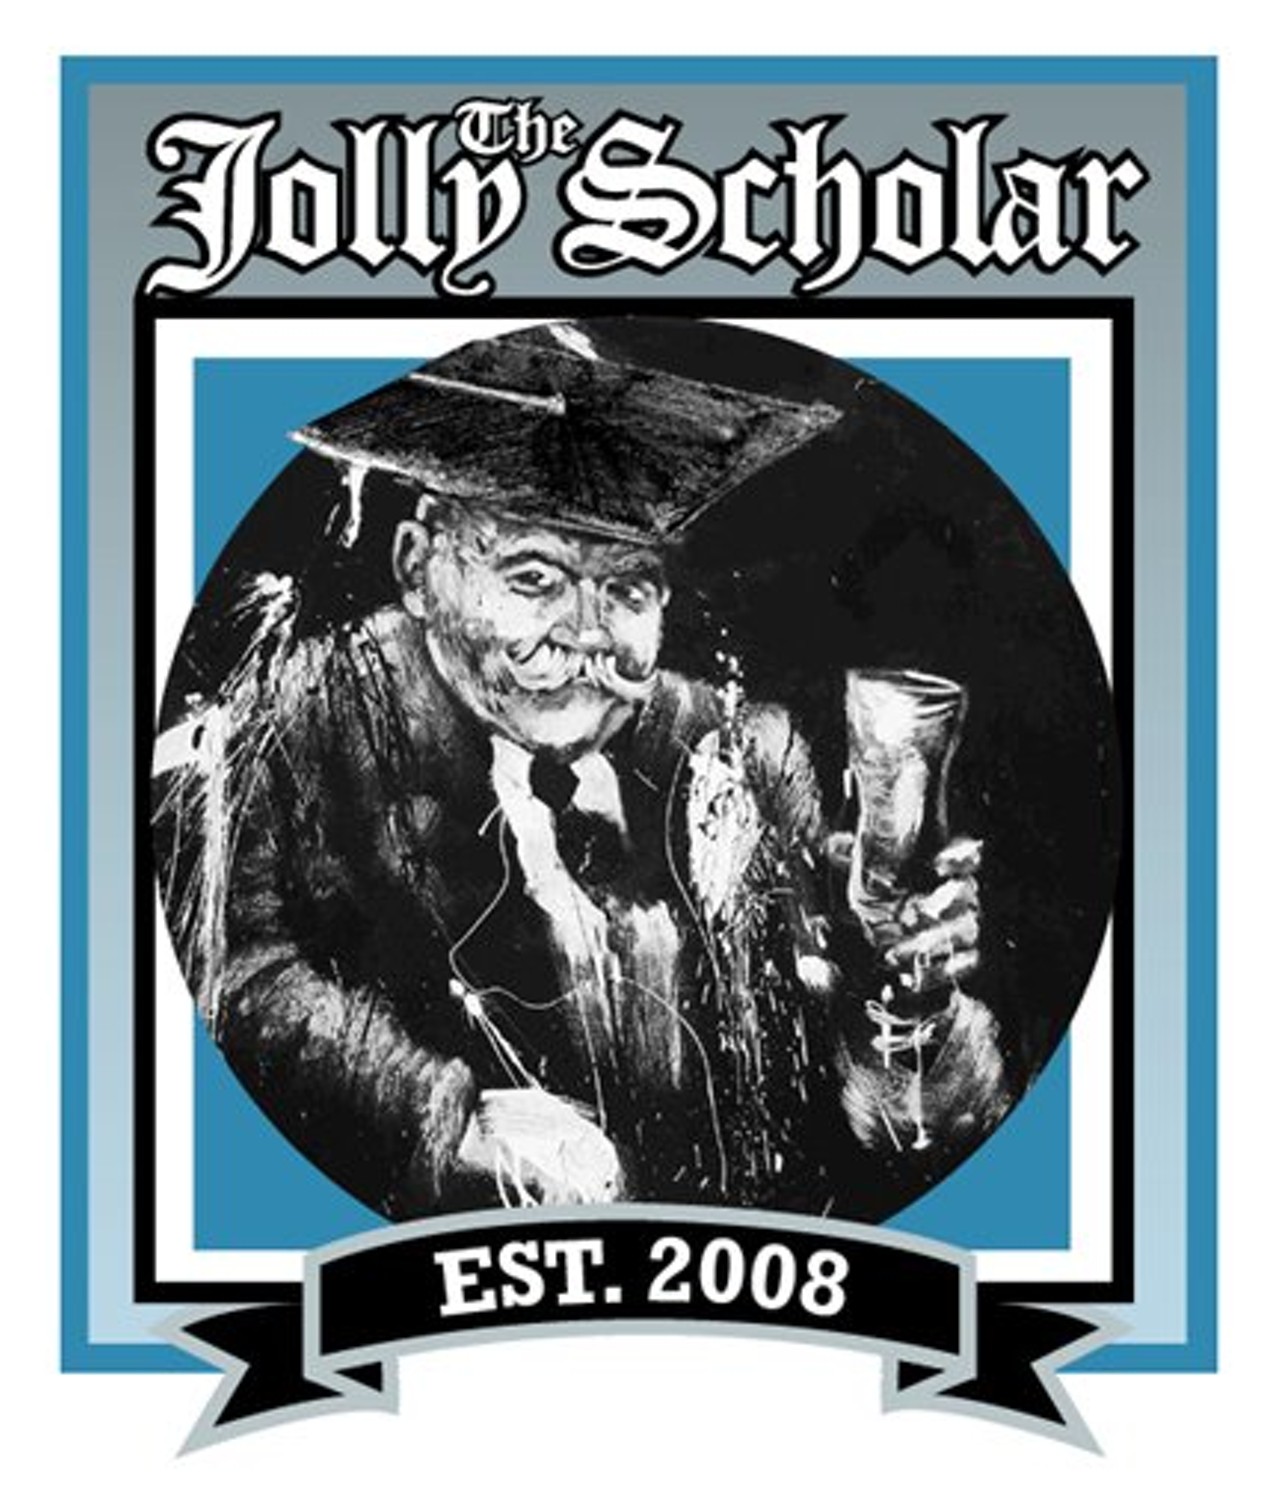 Depending on your age you may feel like Rodney Dangerfield in Back to School, but you need to head to The Jolly Scholar. located on the campus of Case Western Reserve University, on Sunday's starting August 25th they have all you can consume wings, rib tips and fries plus a tall boy PBR for $10! The Jolly Scholar is located at 11111 Euclid Ave. Call 216-368-0090 or visist thejollyscholar.com for more information.